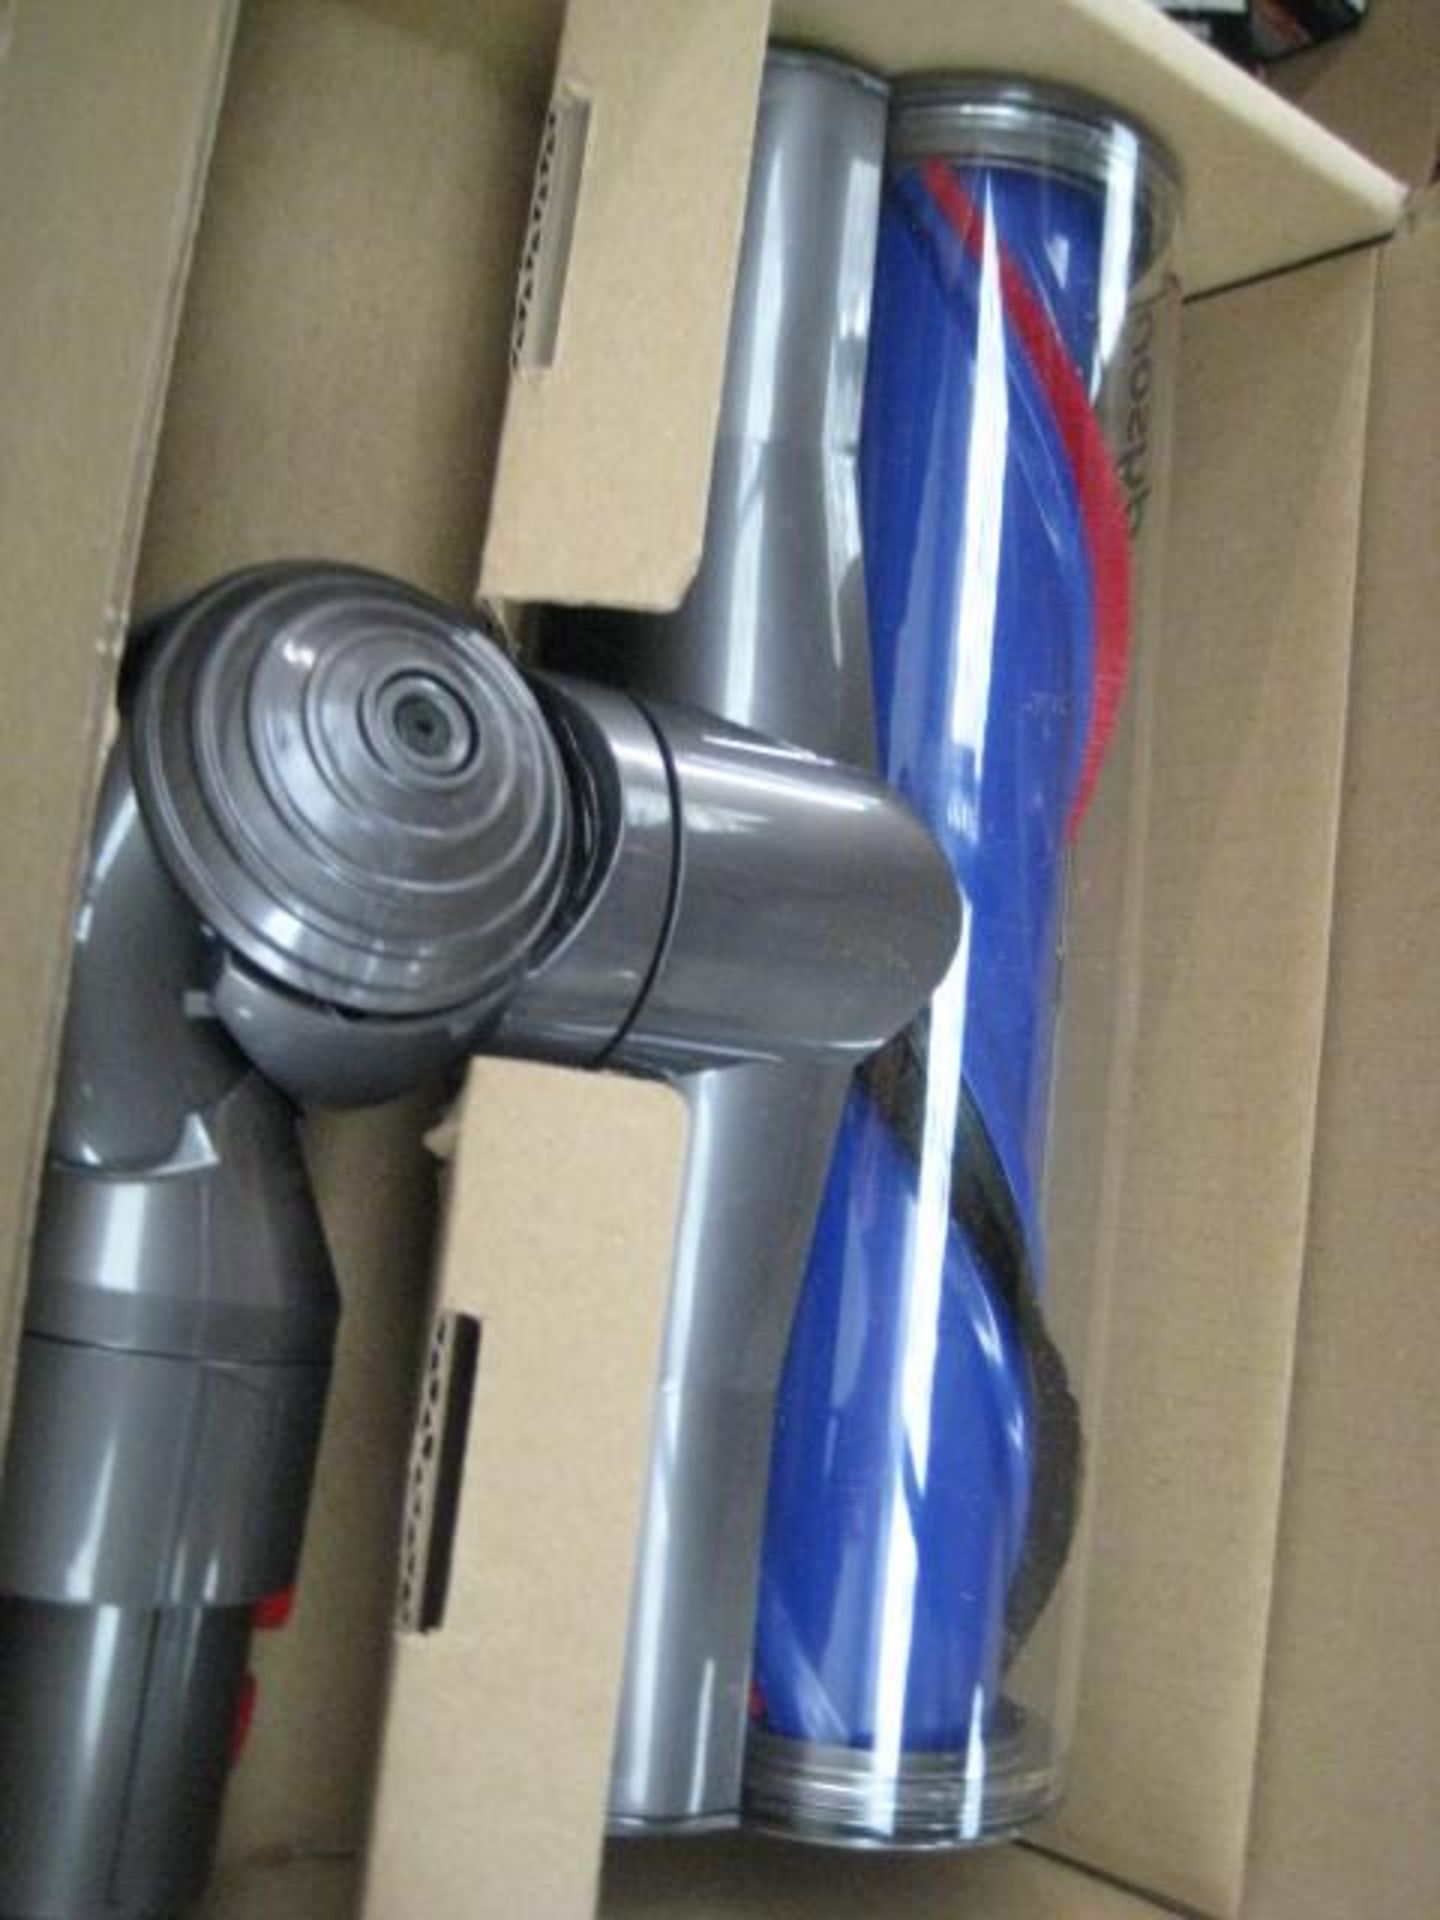 Boxed Dyson motorized head for vacuum cleaner